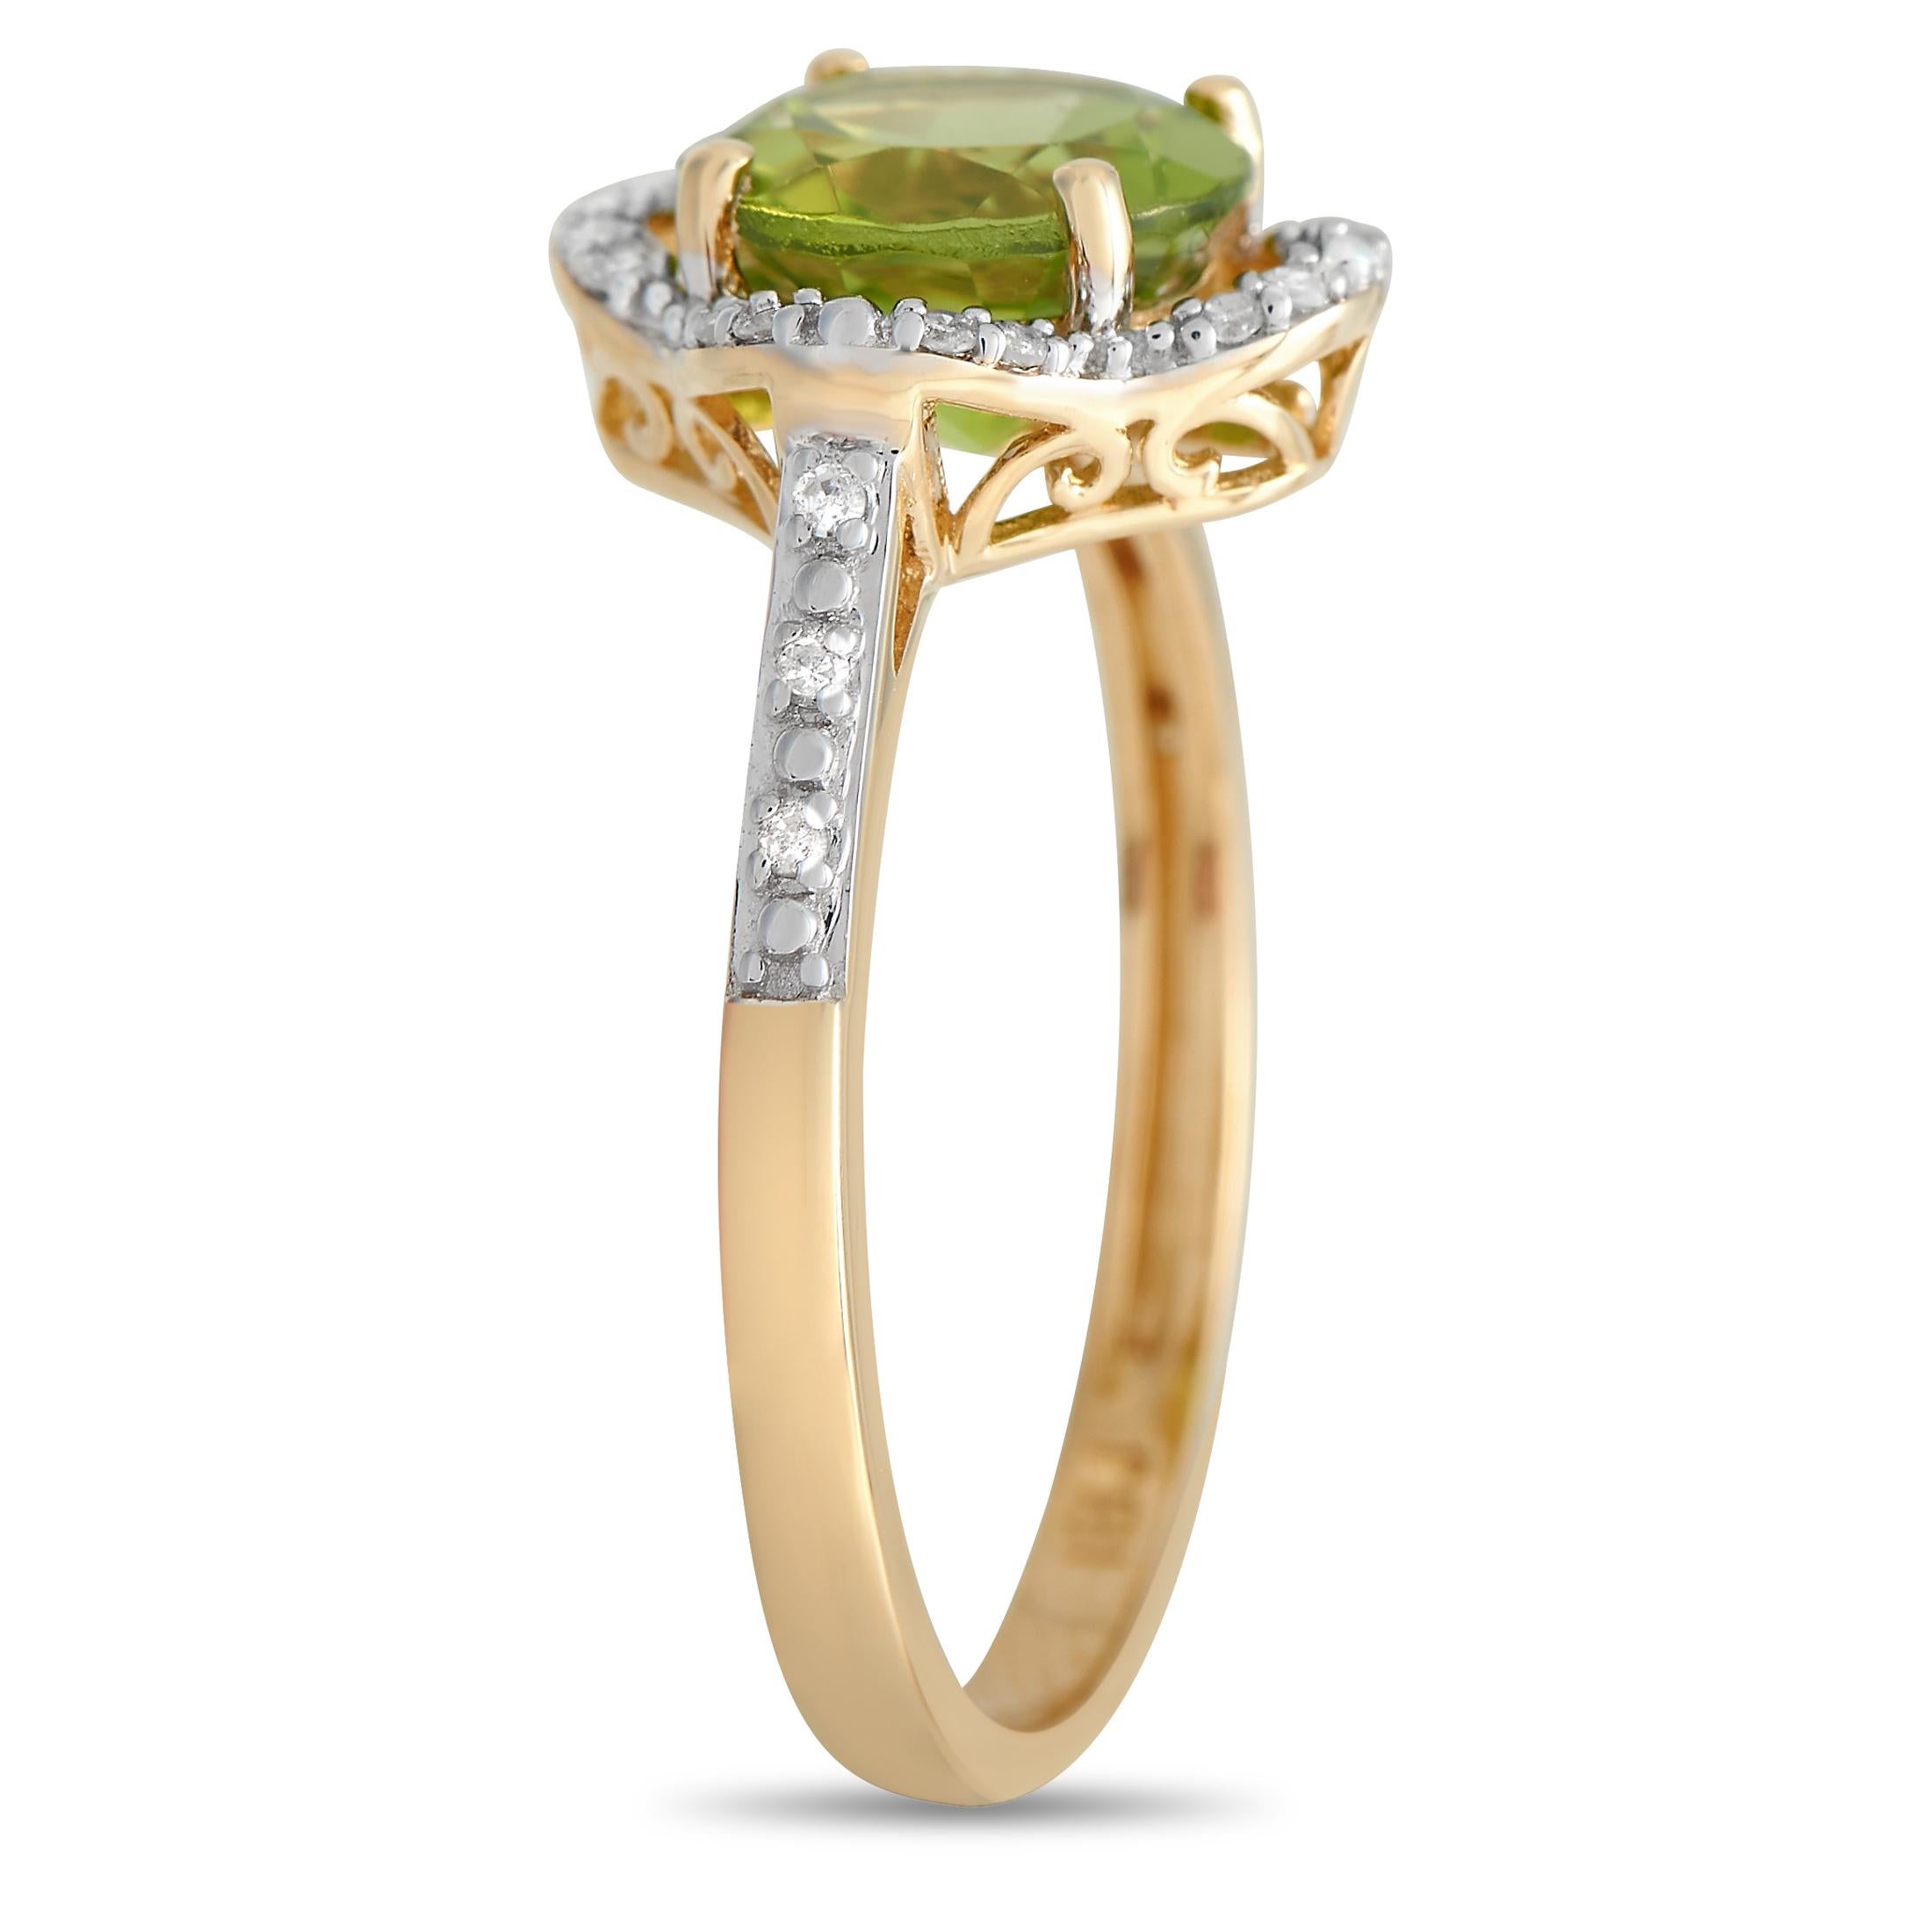 Don't underestimate the flash of color this ring adds to an ensemble. An piece, this ring shimmers with diamonds and glows with a bright lime green peridot, which is also the birthstone for the month of August. Wear this to polish a look on your